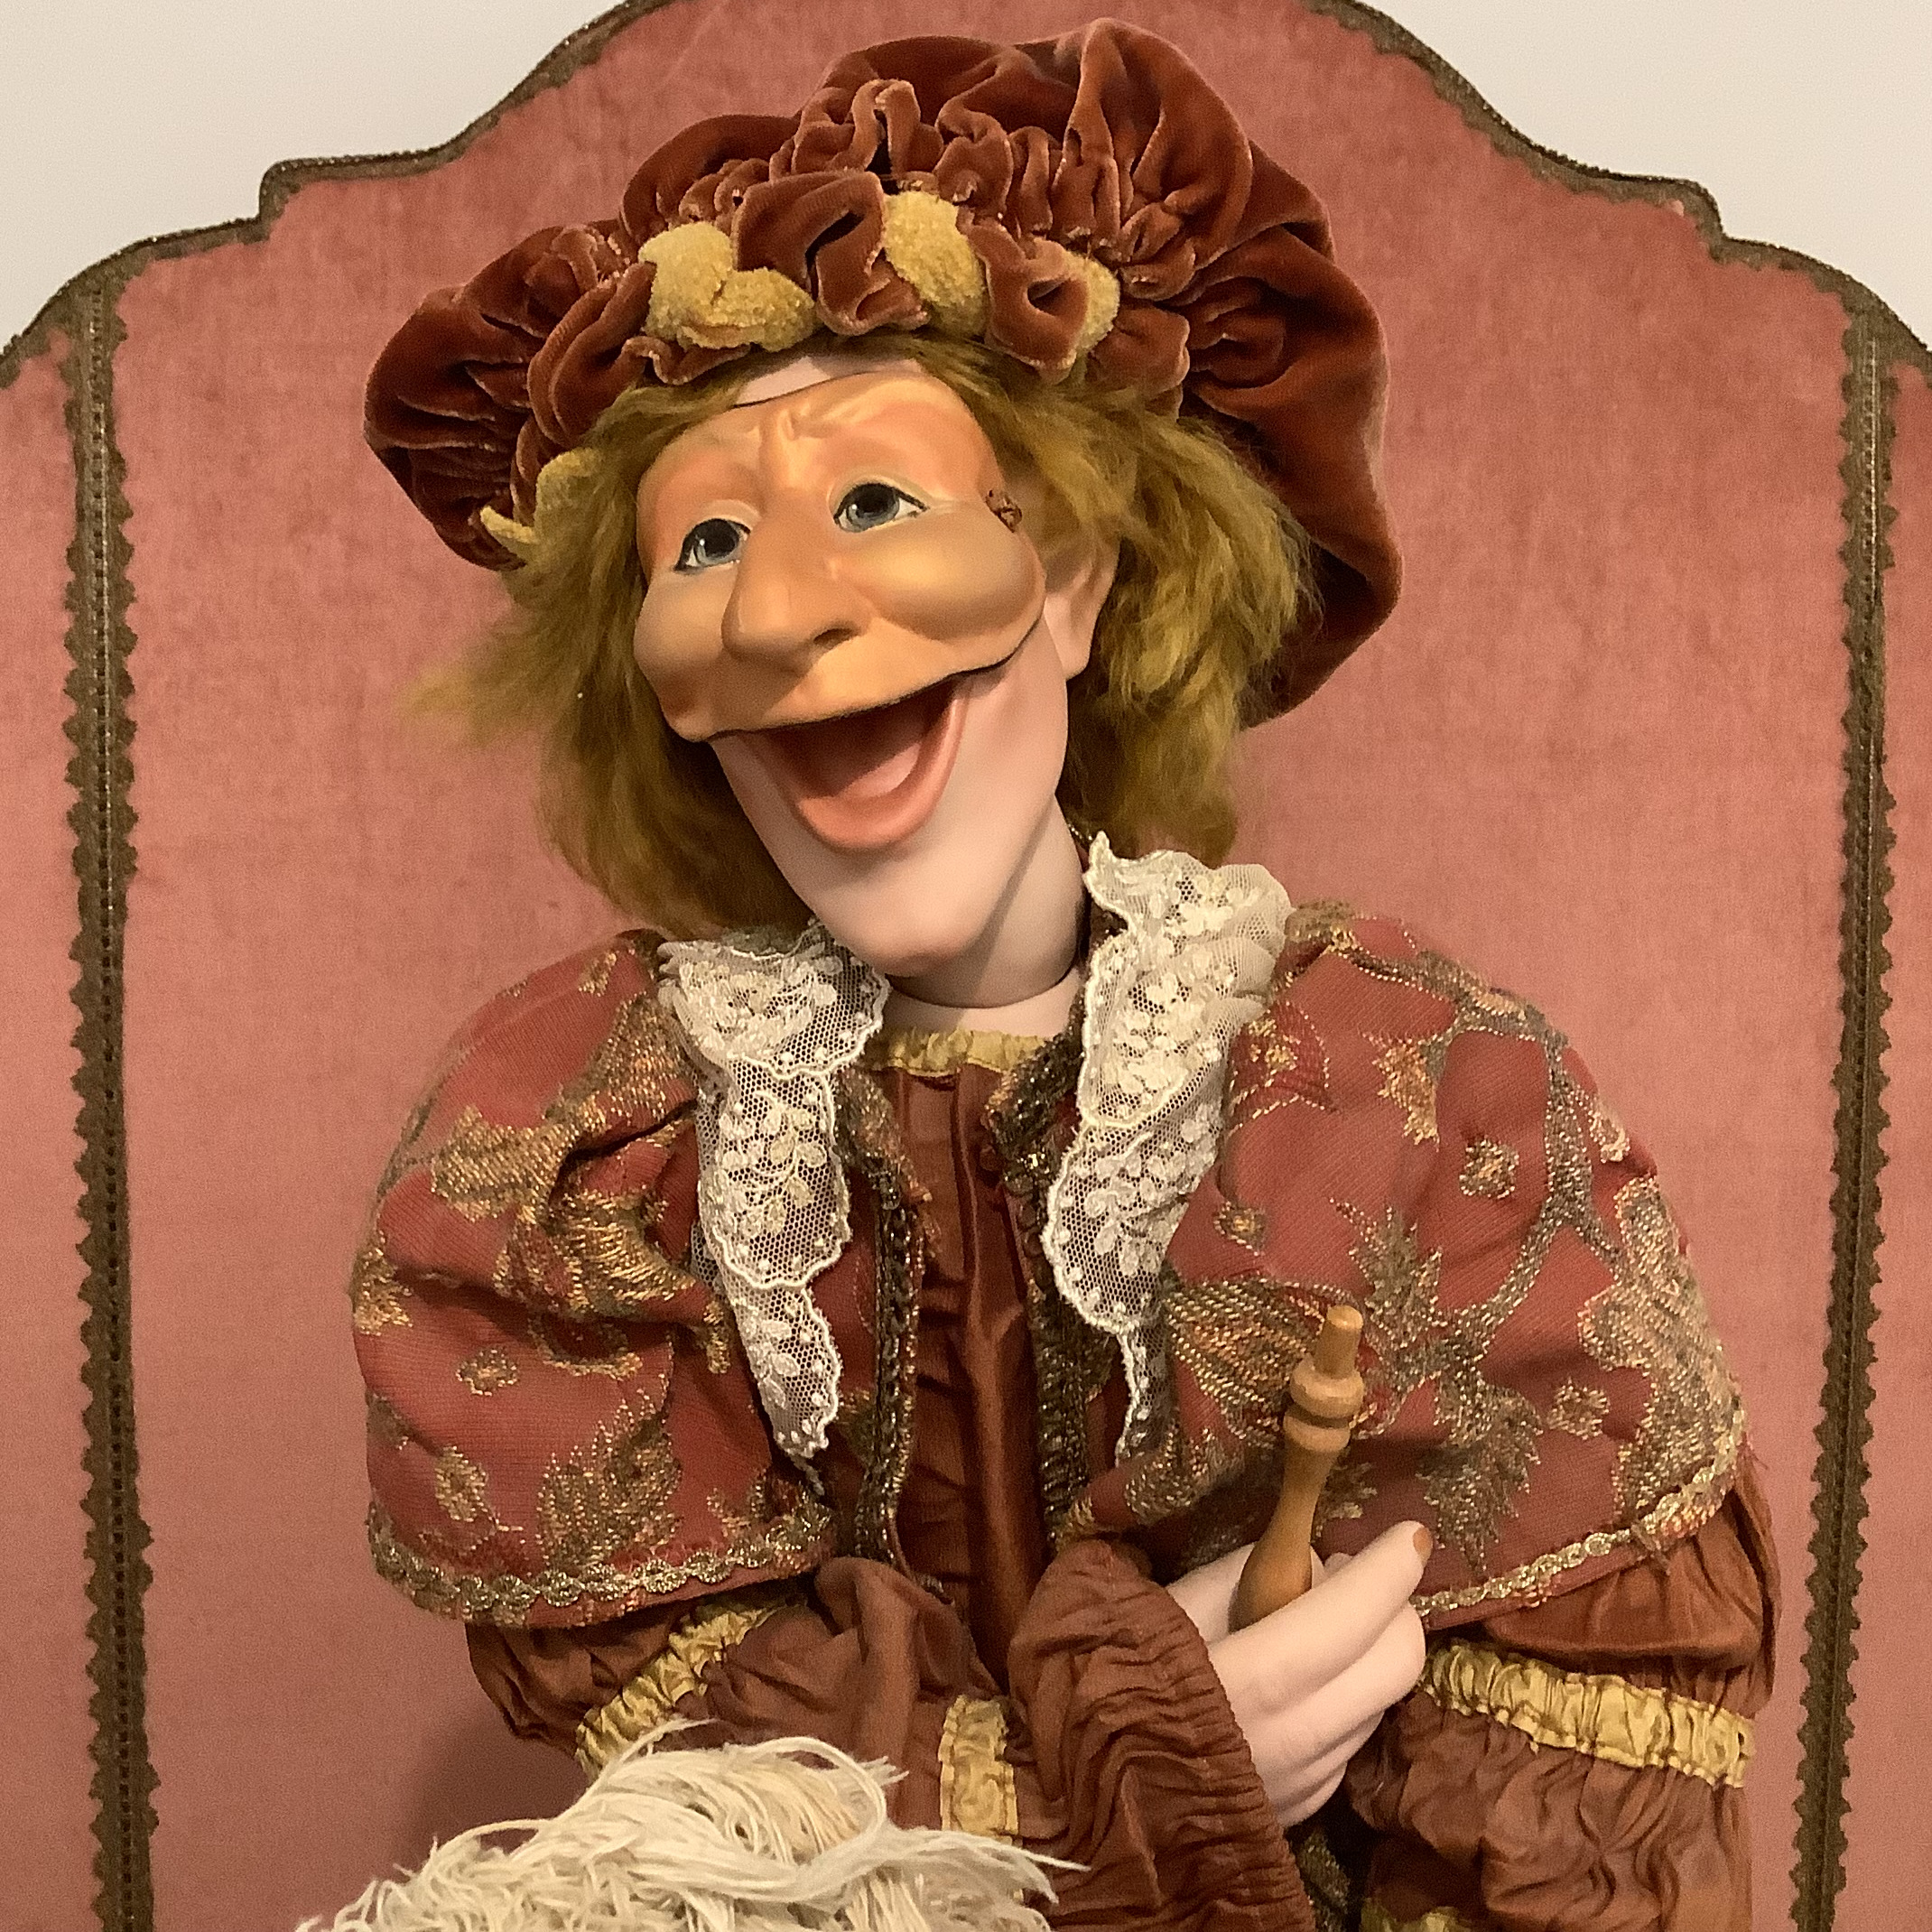 Horseman doll with comically grotesque caricature face in three options, seated on an antique rocking horse